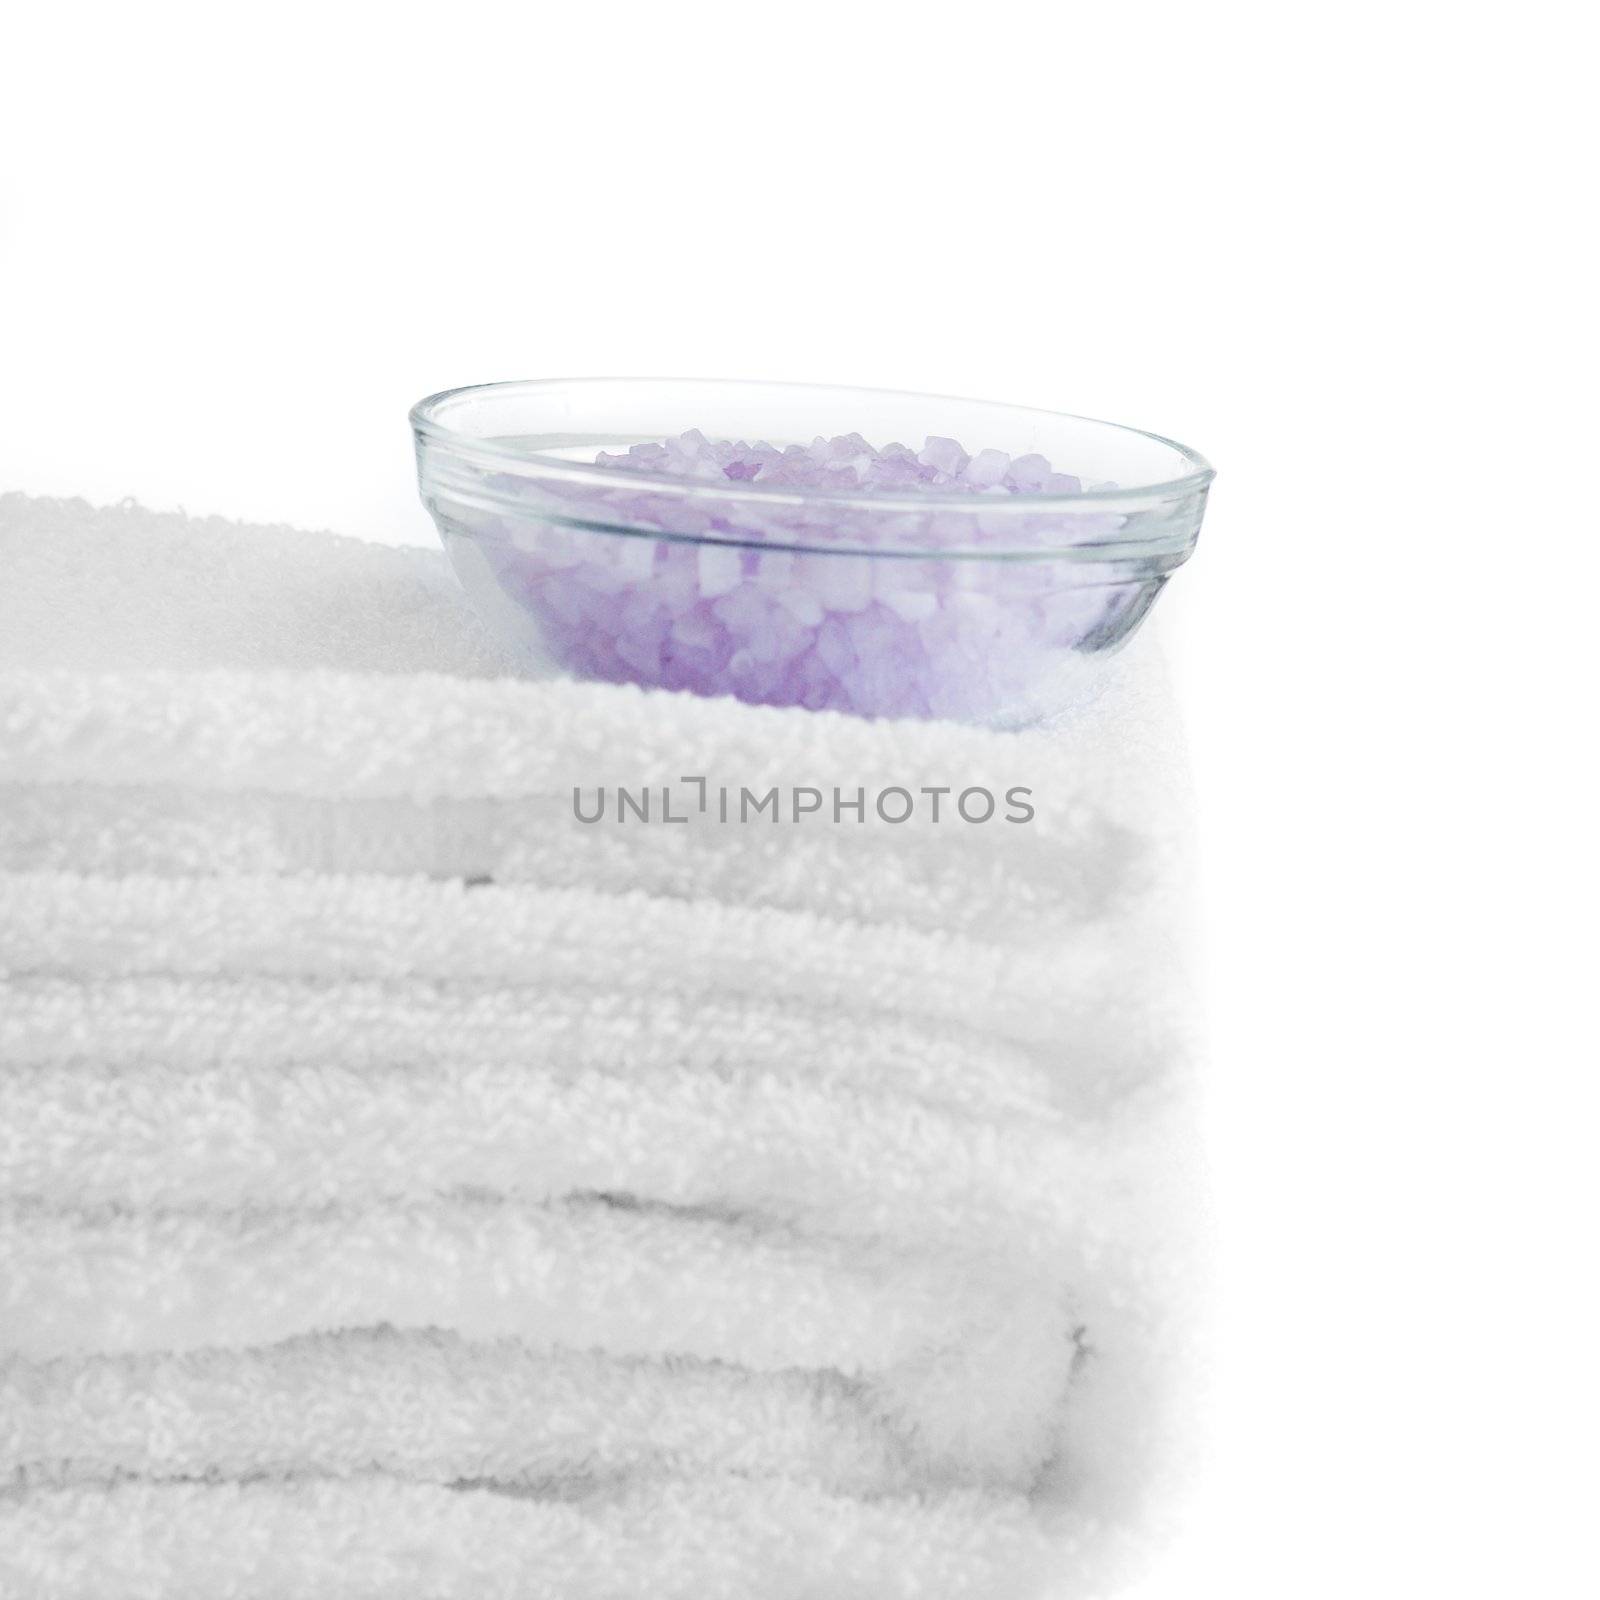 Bed and bath treatment against a white background.